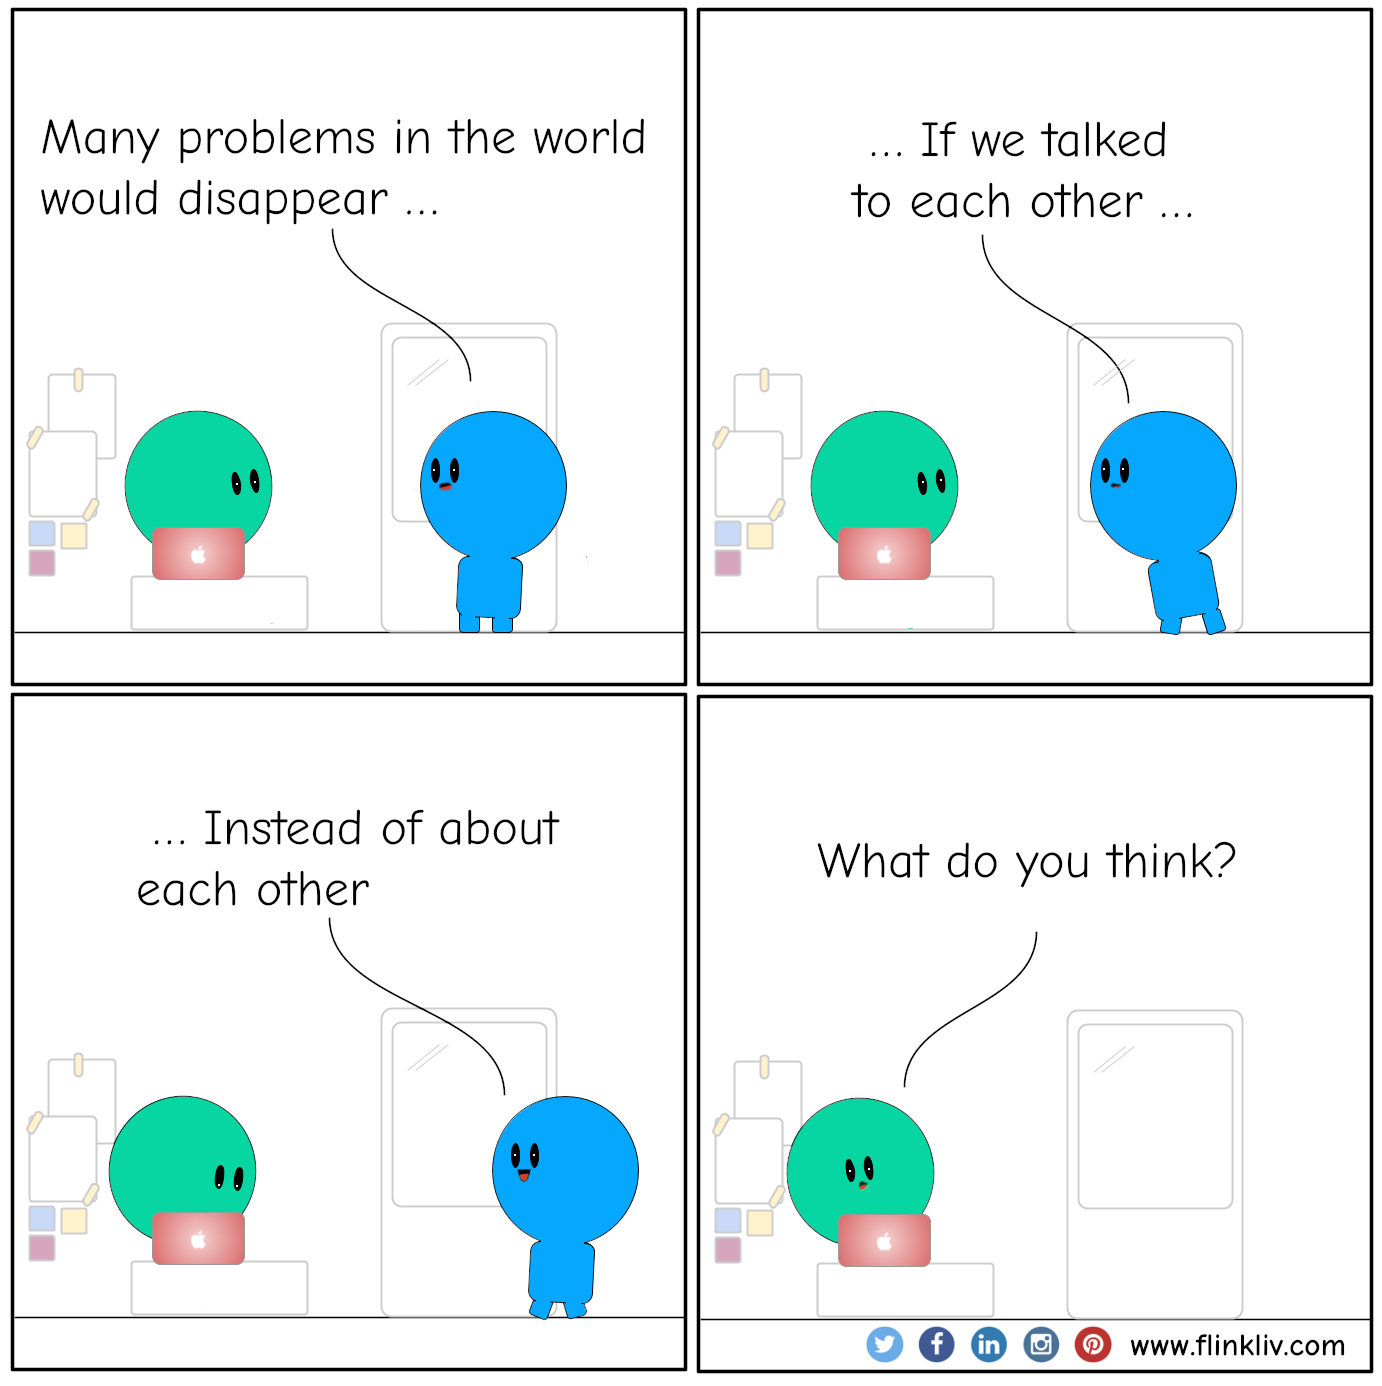 Conversation between A and B about talking to people and not about people. B: Many problems in the world would disappear if we talked to each other, instead of about each other. A: what do you think? By flinkliv.com